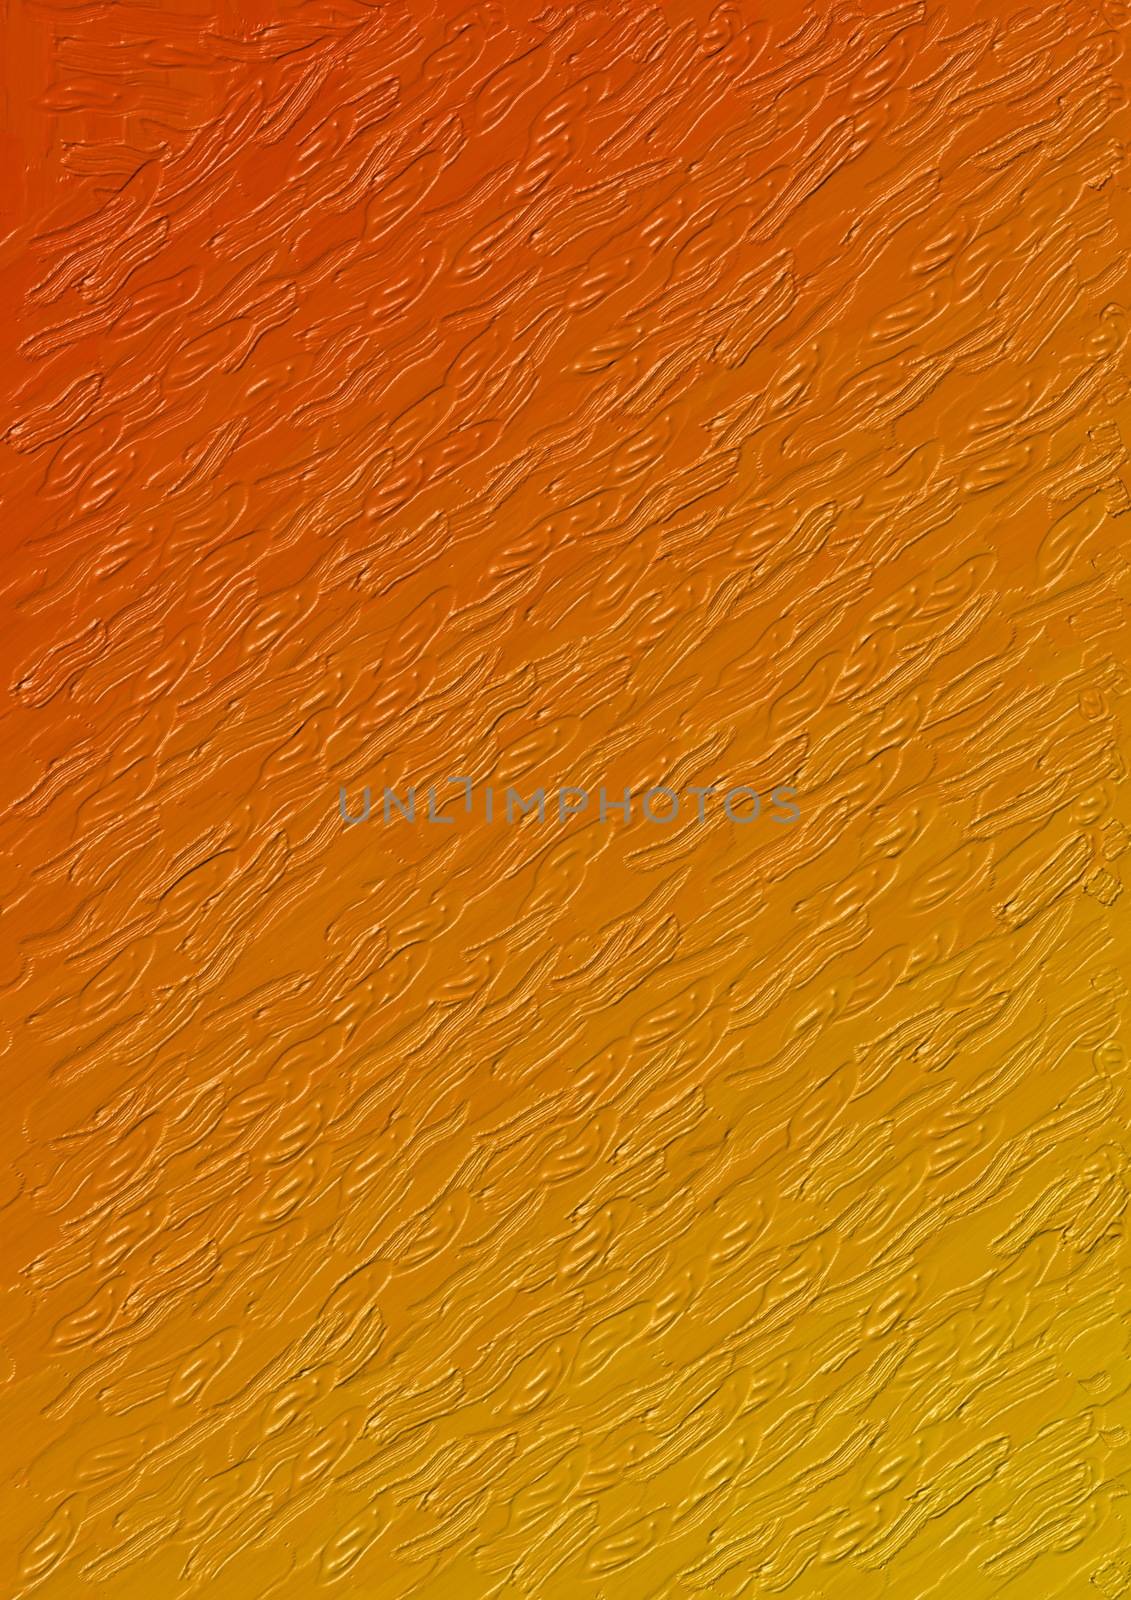 Brush strokes painted on color gradient background.